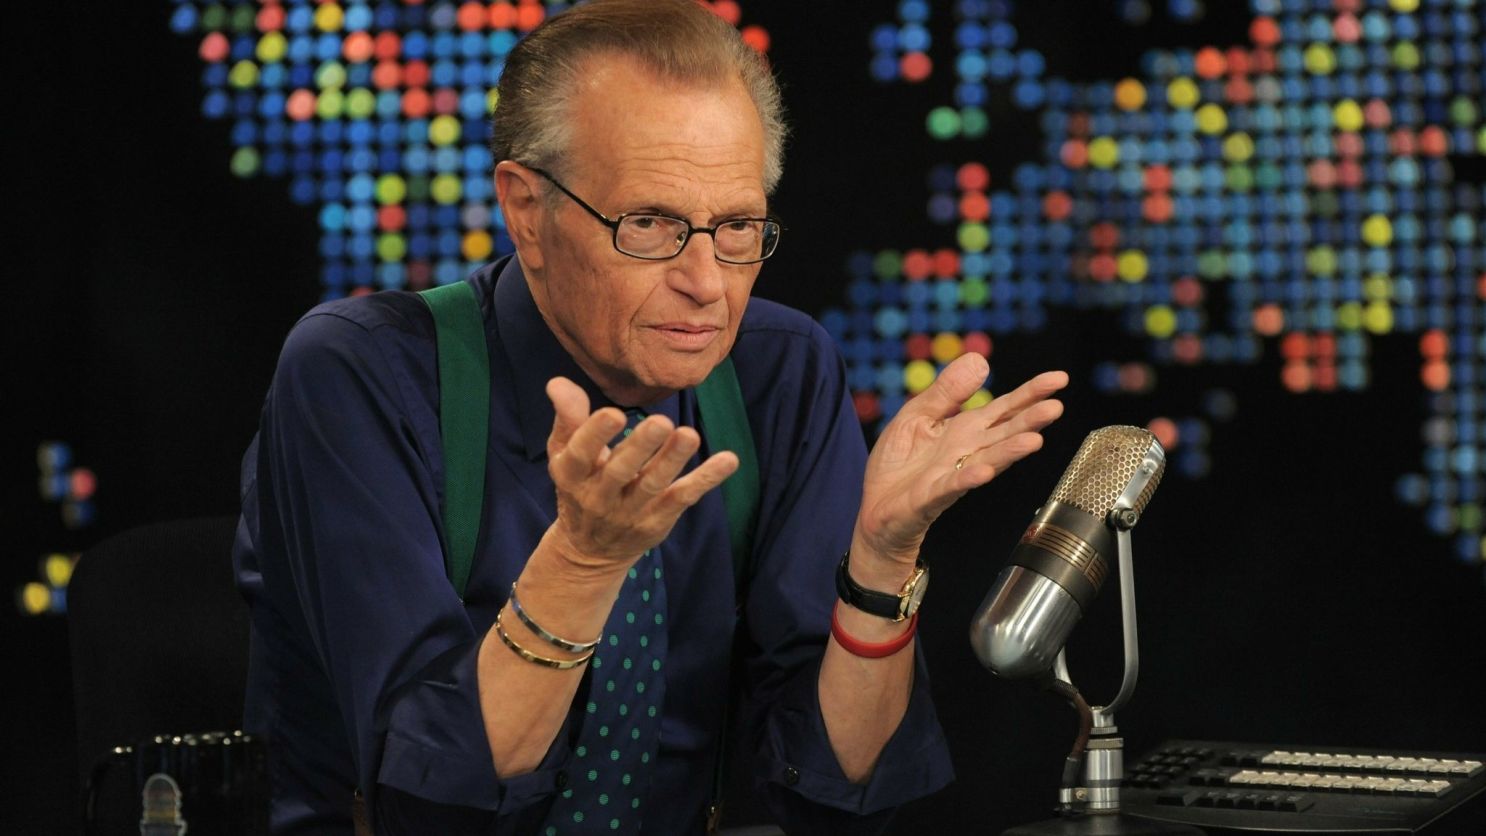 Larry King, Legendary Broadcast Journalist, Dies At Age 87